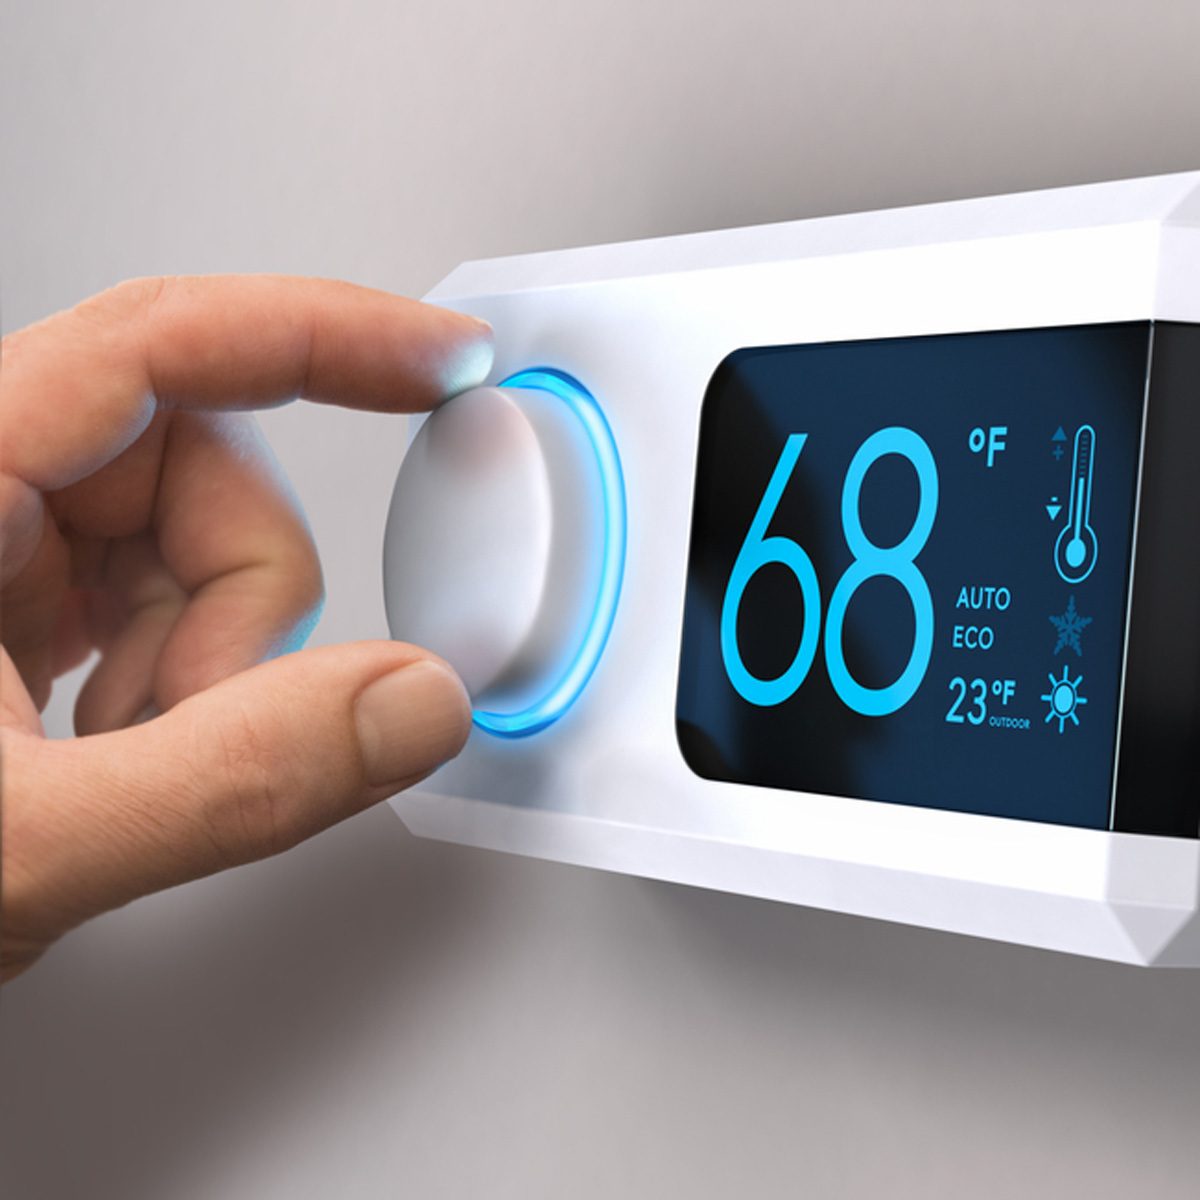 Update: Smart Thermostat